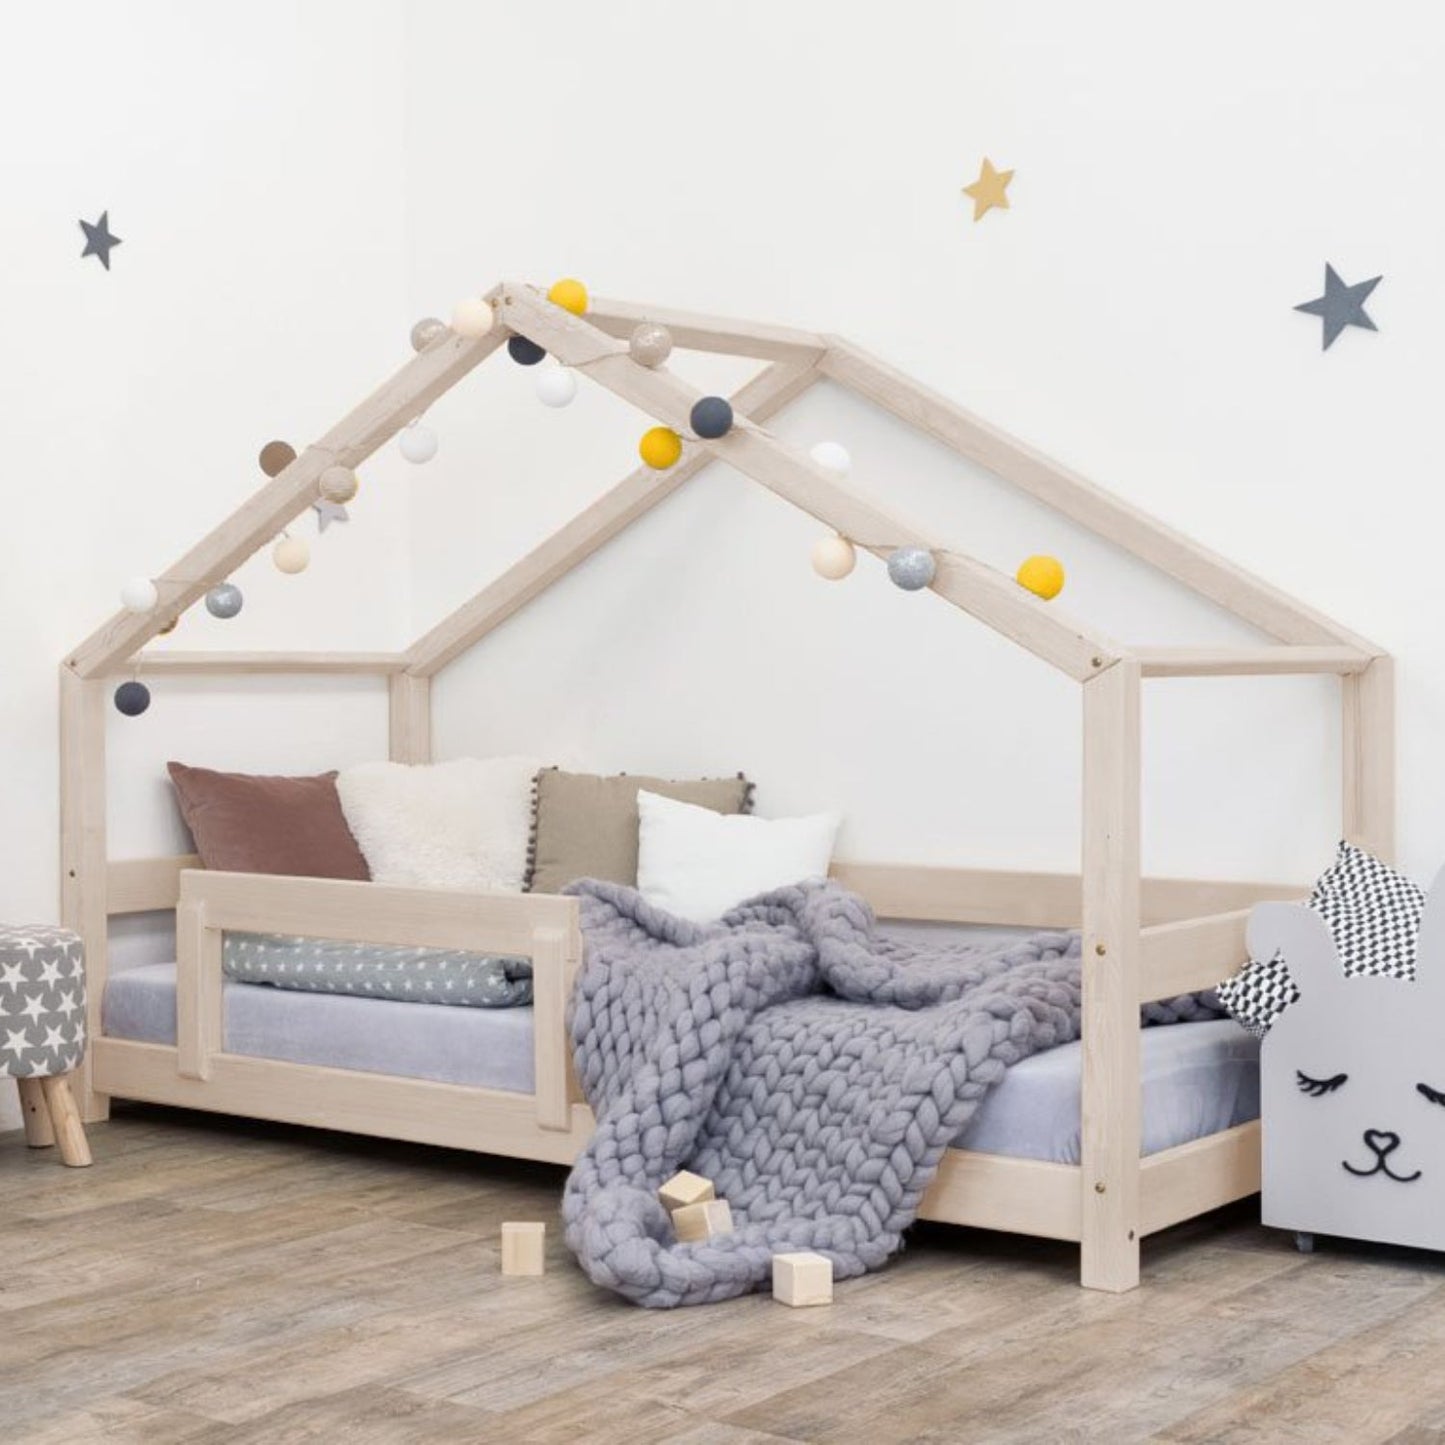 Lucky Children's House Bed with Bed Guard